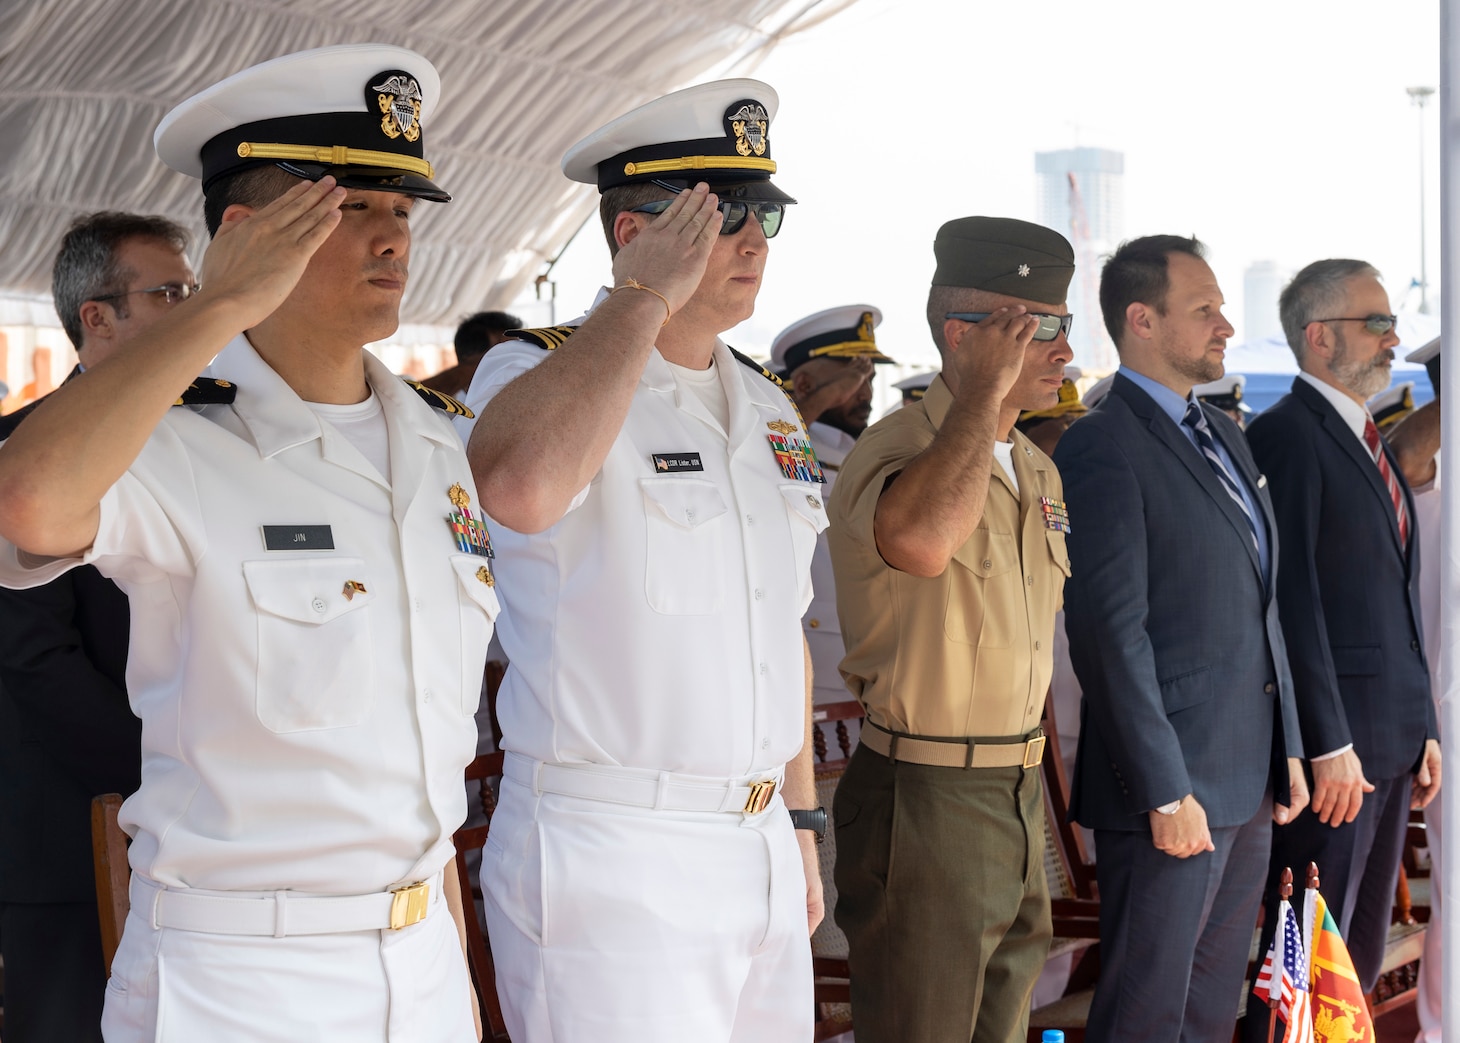 U.S. Navy Sailors assigned to amphibious transport dock USS Anchorage (LPD 23) and Lt. Col. Jared Reddinger, commanding officer of Battalion Landing Team 2/4, 13th Marine Expeditionary Unit, salute during the playing of the national anthem for Cooperation Afloat Readiness and Training/Marine Exercise Sri Lanka 2023 opening ceremony in Colombo, Jan. 19. CARAT/MAREX Sri Lanka is a bilateral exercise between Sri Lanka and the United States designed to promote regional security cooperation, practice humanitarian assistance and disaster relief, and strengthen maritime understanding, partnerships, and interoperability. In its 28th year, the CARAT series is comprised of multinational exercises, designed to enhance U.S. and partner forces’ abilities to operate together in response to traditional and non-traditional maritime security challenges in the Indo-Pacific region.